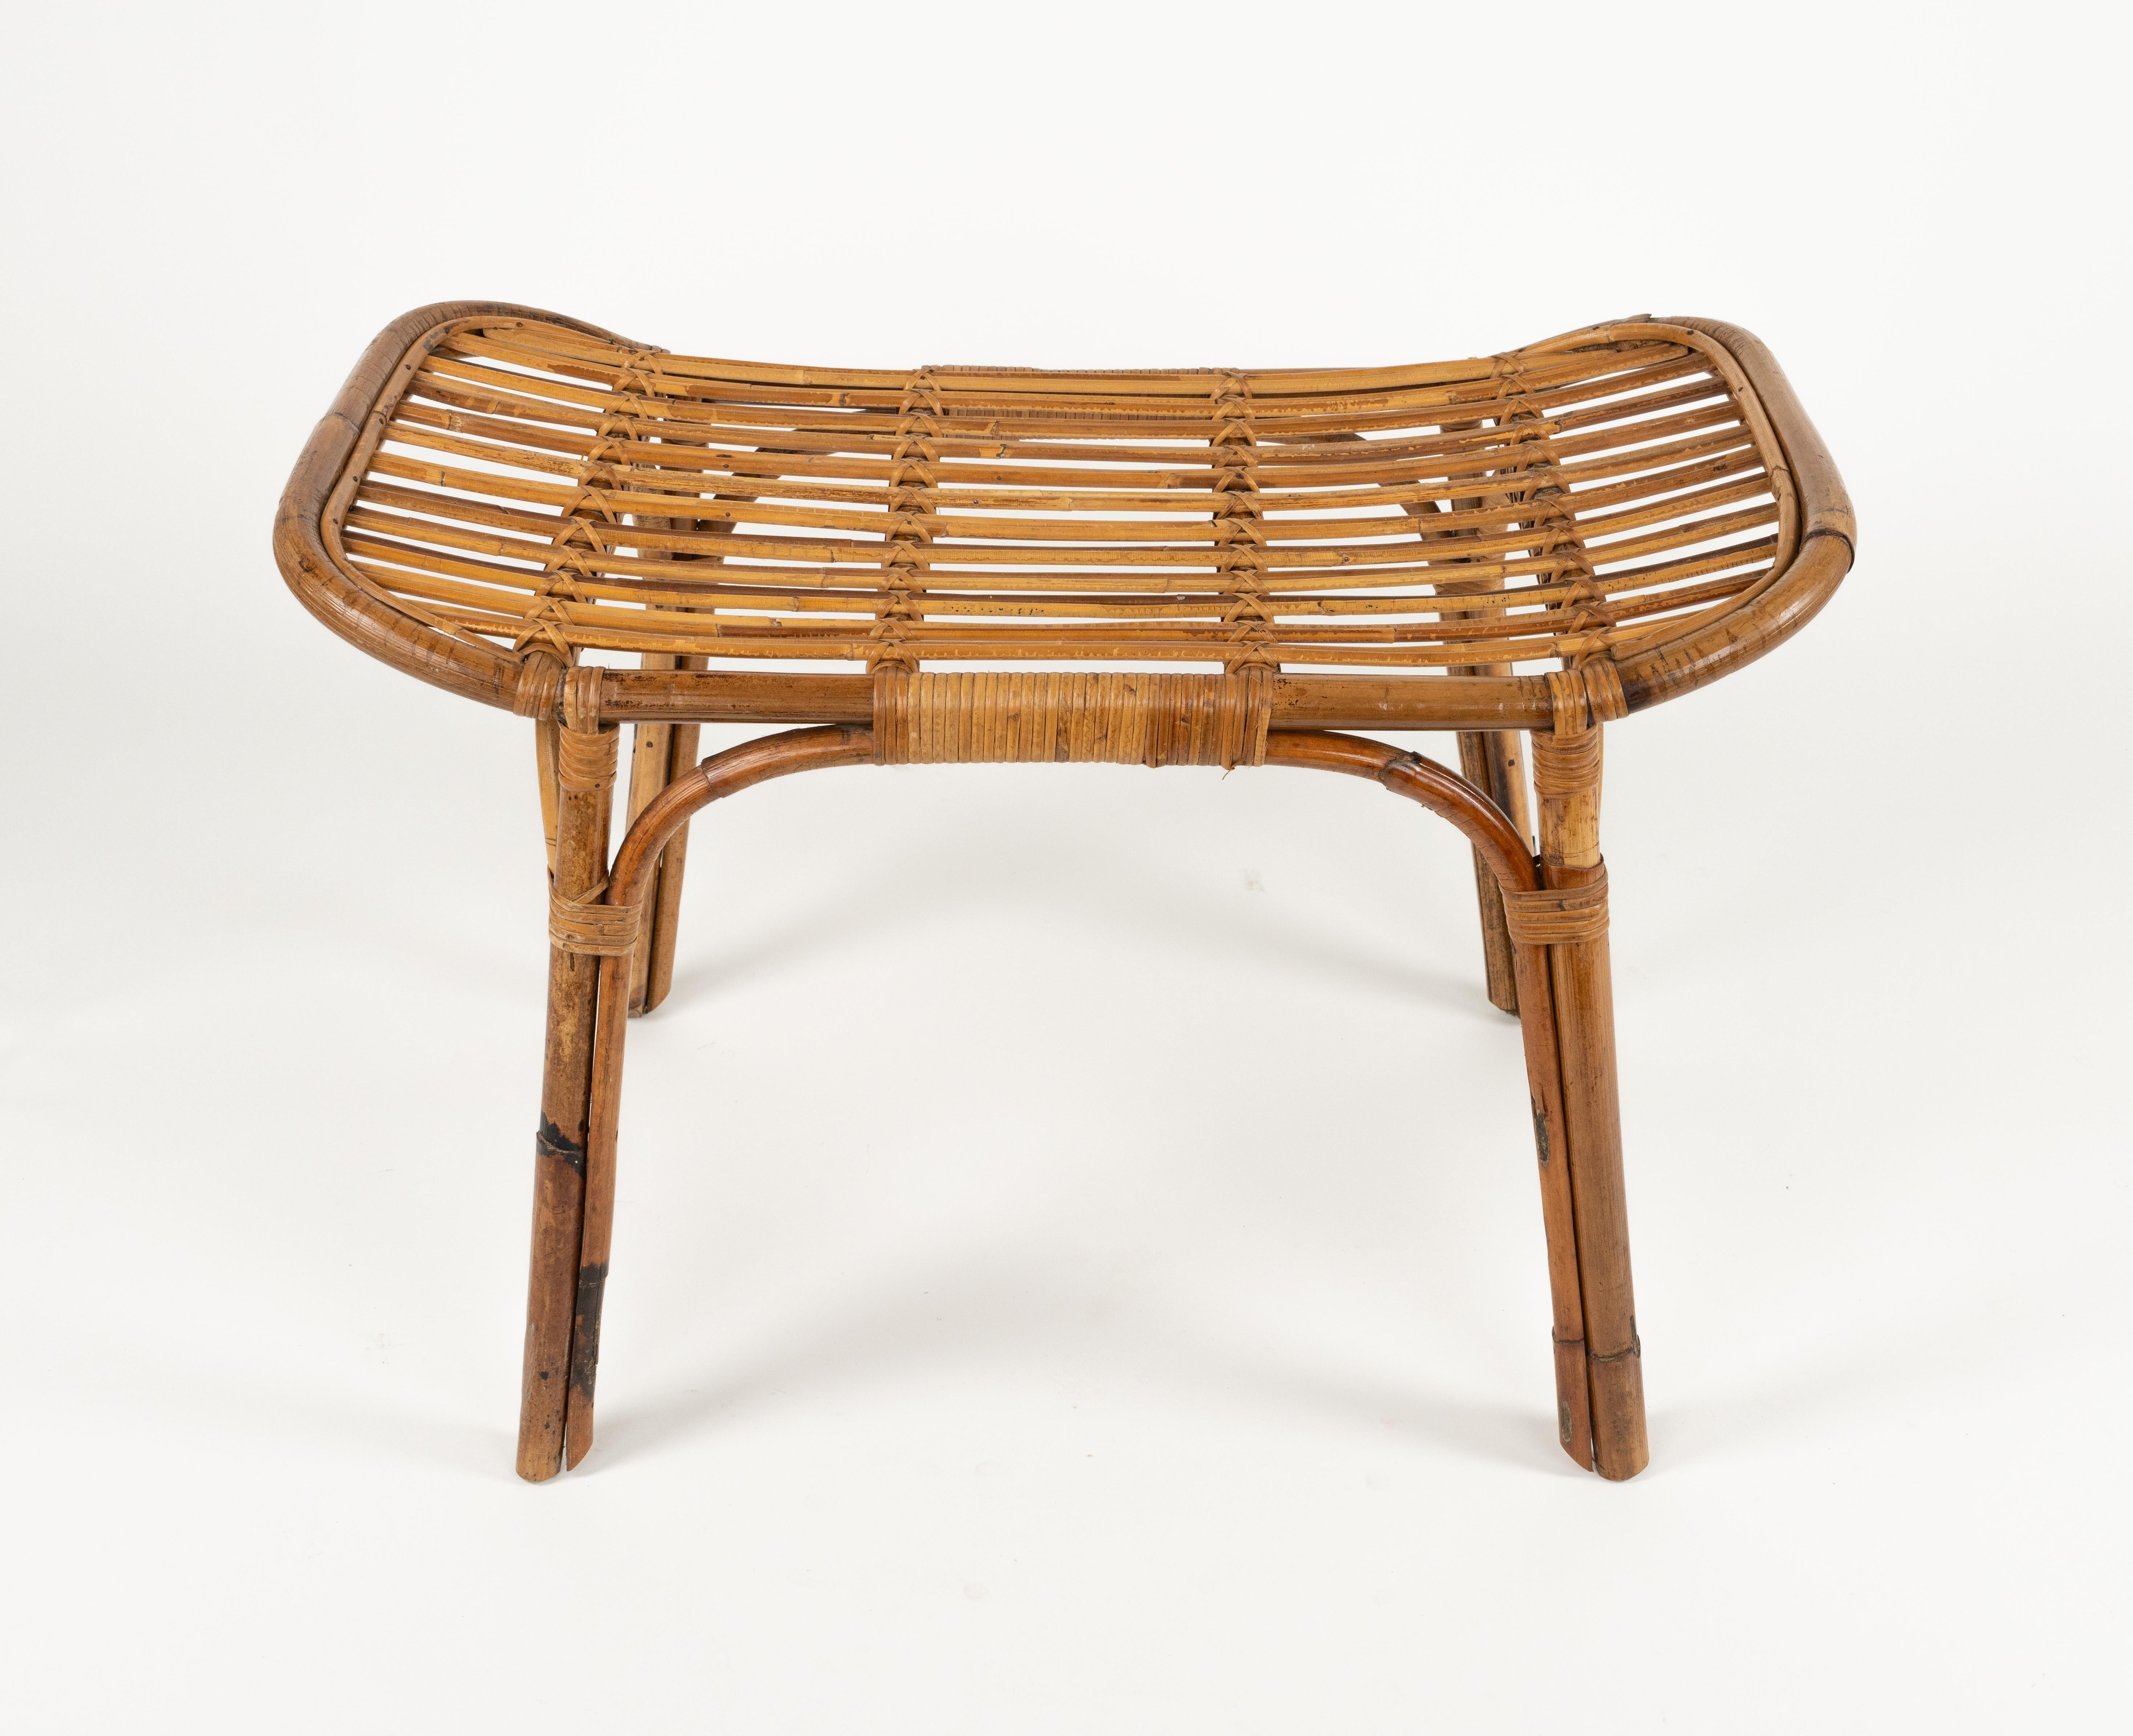 Midcentury Bench or Side Table in Rattan & Bamboo Tito Agnoli Style, Italy 1960s For Sale 5